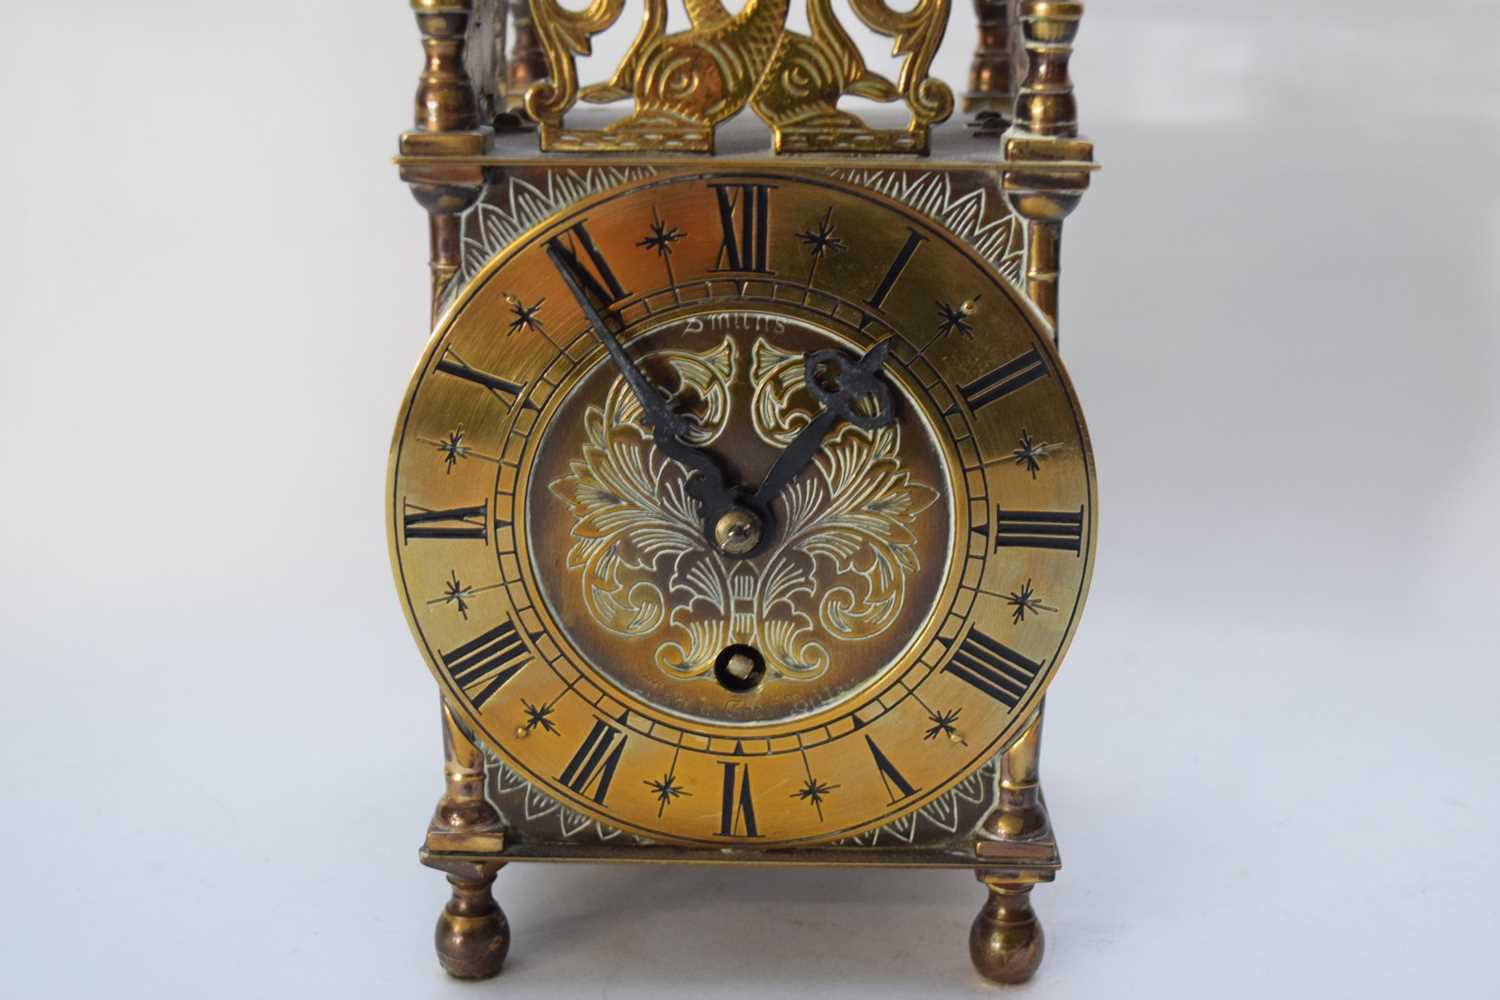 Lantern clock made by Smiths - Image 2 of 6